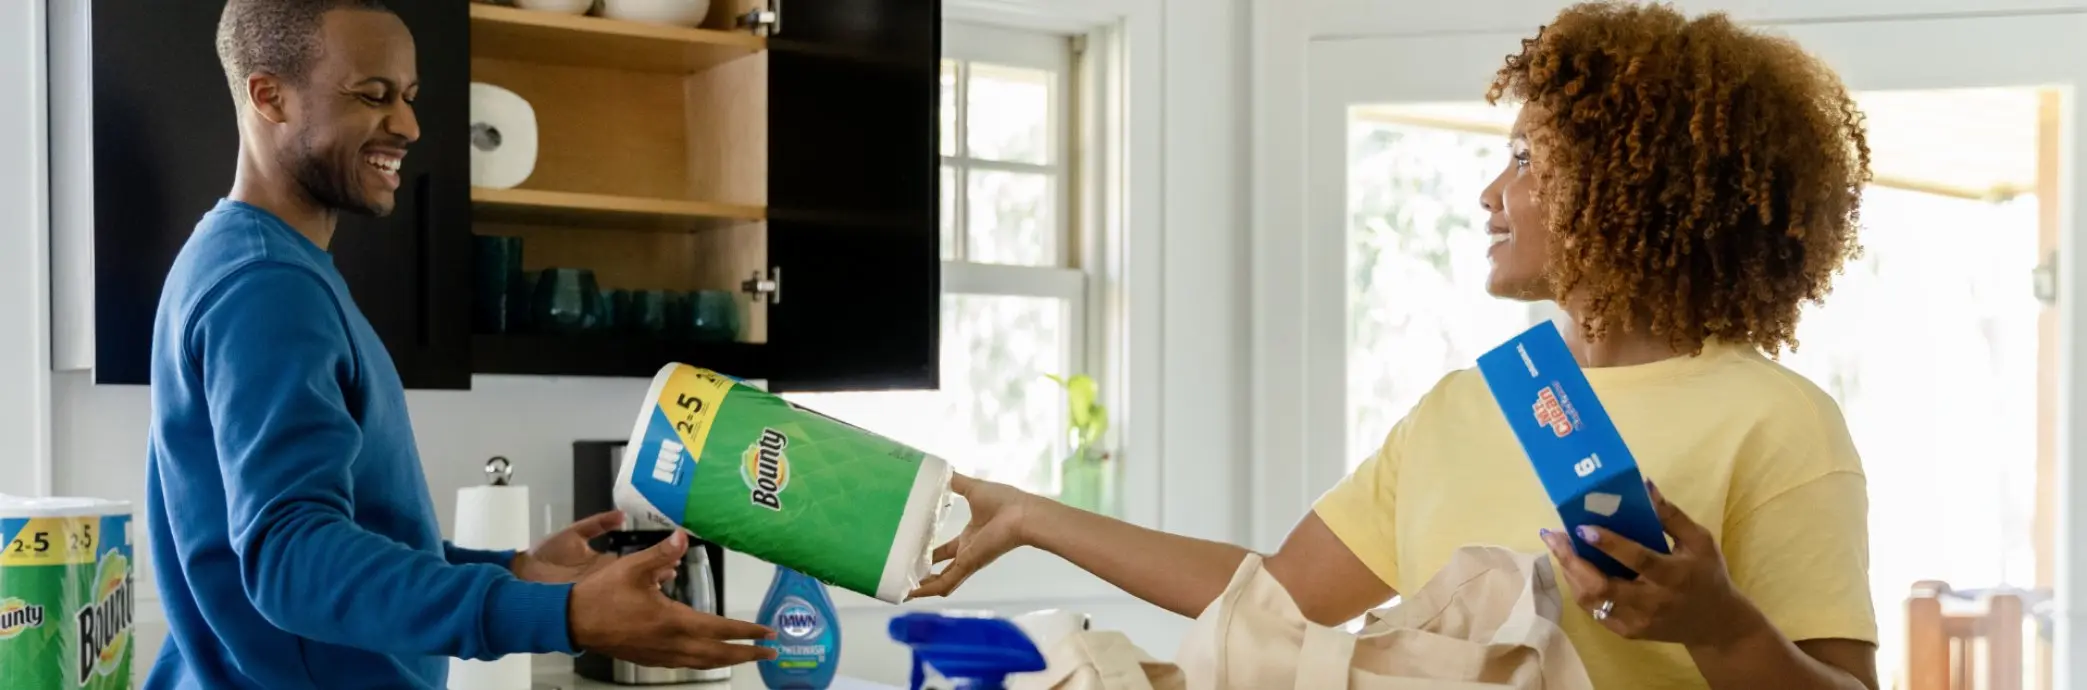 Woman and man are unpacking groceries in kitchen. Woman hands man a roll of Bounty paper towels.